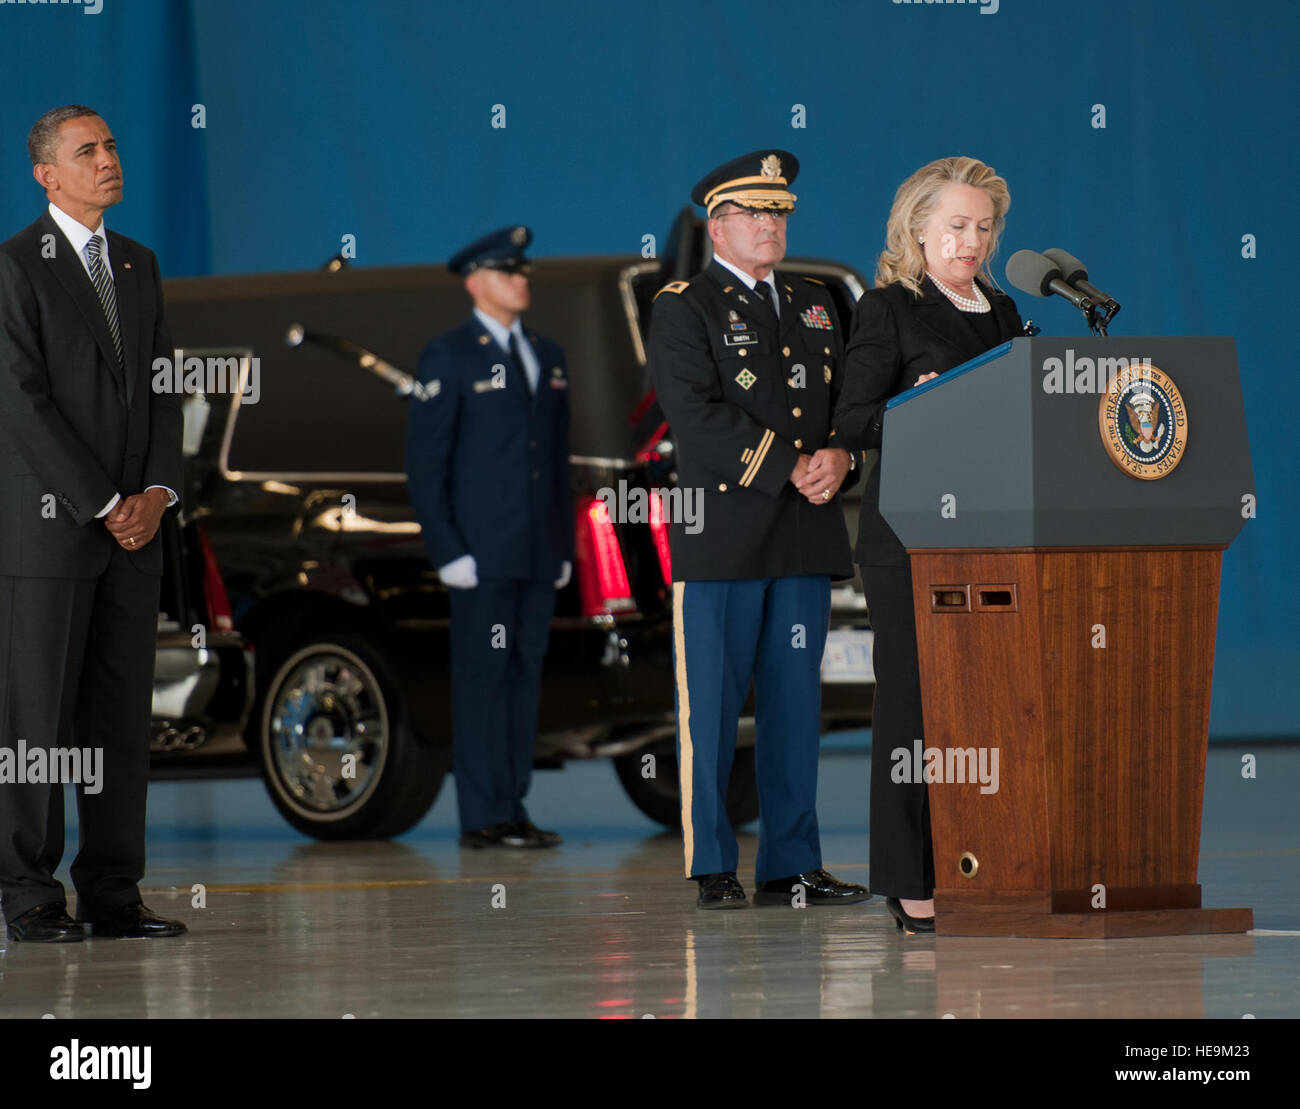 Secretary of State Hillary Clinton speaks during the dignified transfer of remains for J. Christopher Stevens, U.S. ambassador to Libya, and three other Americans,  Sept. 14, 2012, at Joint Base Andrews, Md. The U.S. State Department held a ceremony on base to honor the Americans who gave their lives in service to their country.  Senior Airman Perry Aston) (Released) Stock Photo